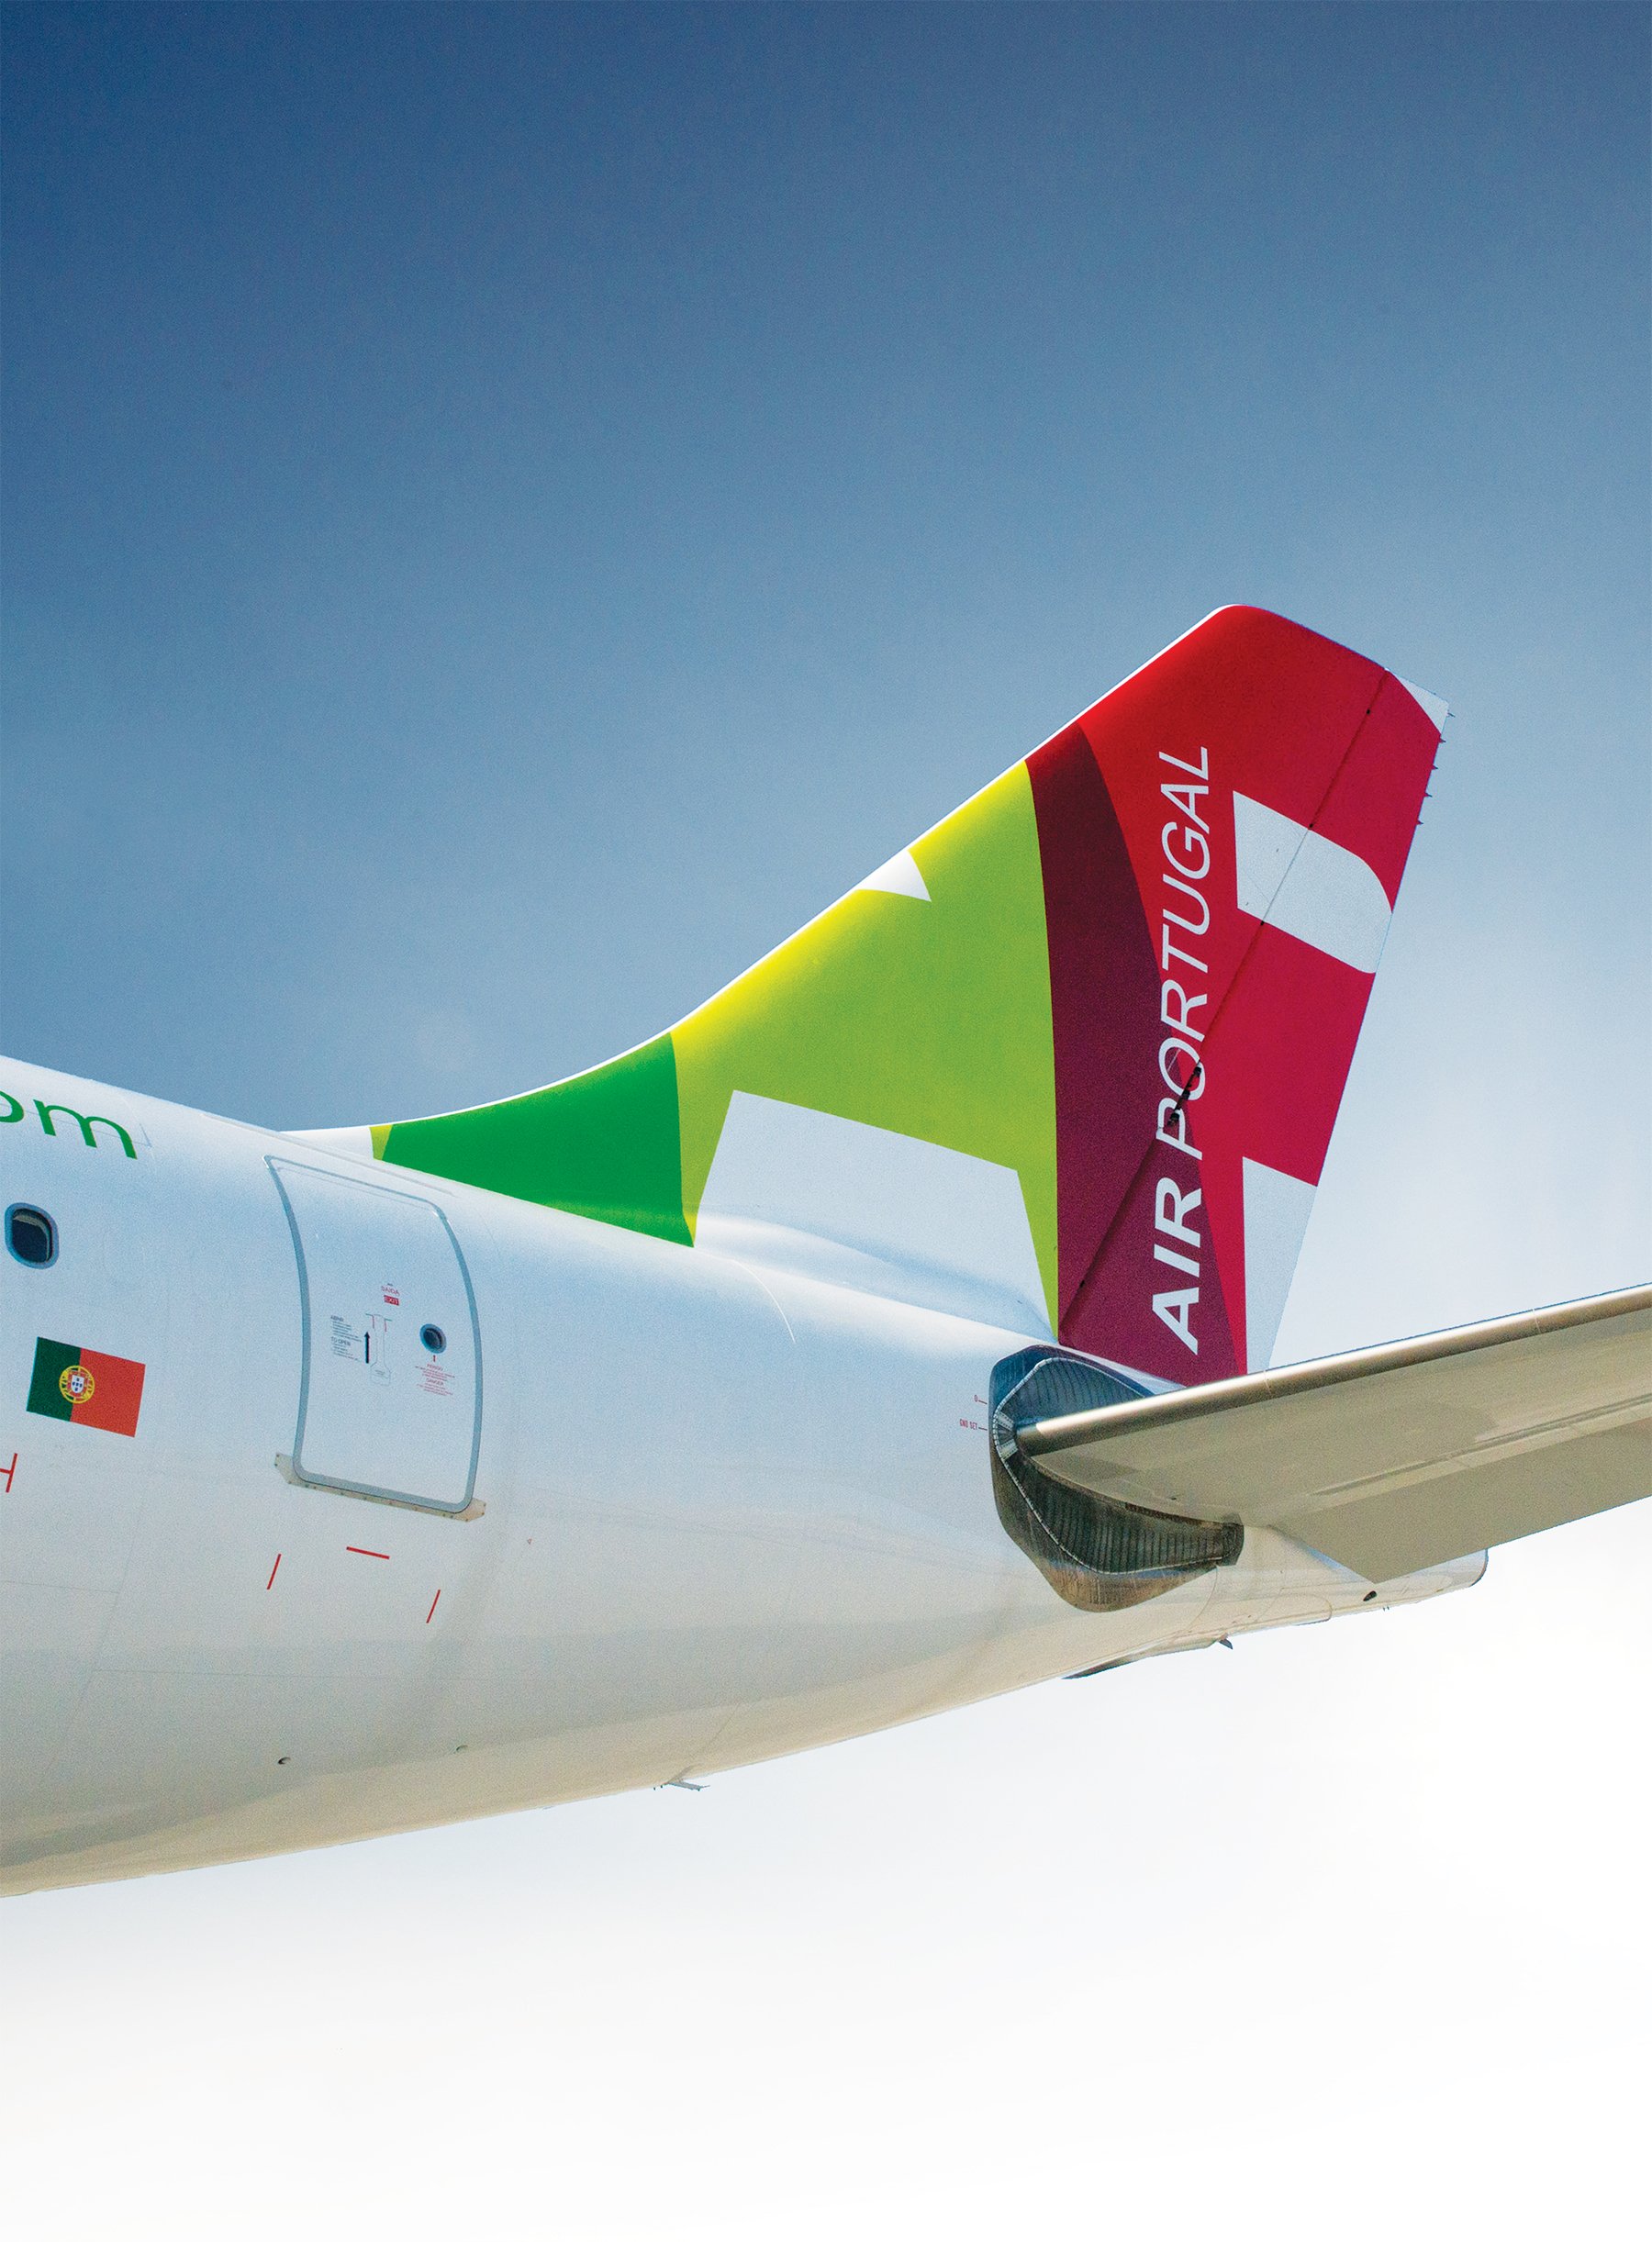 Detail photograph of the tail of a TAP Air Portugal plane.